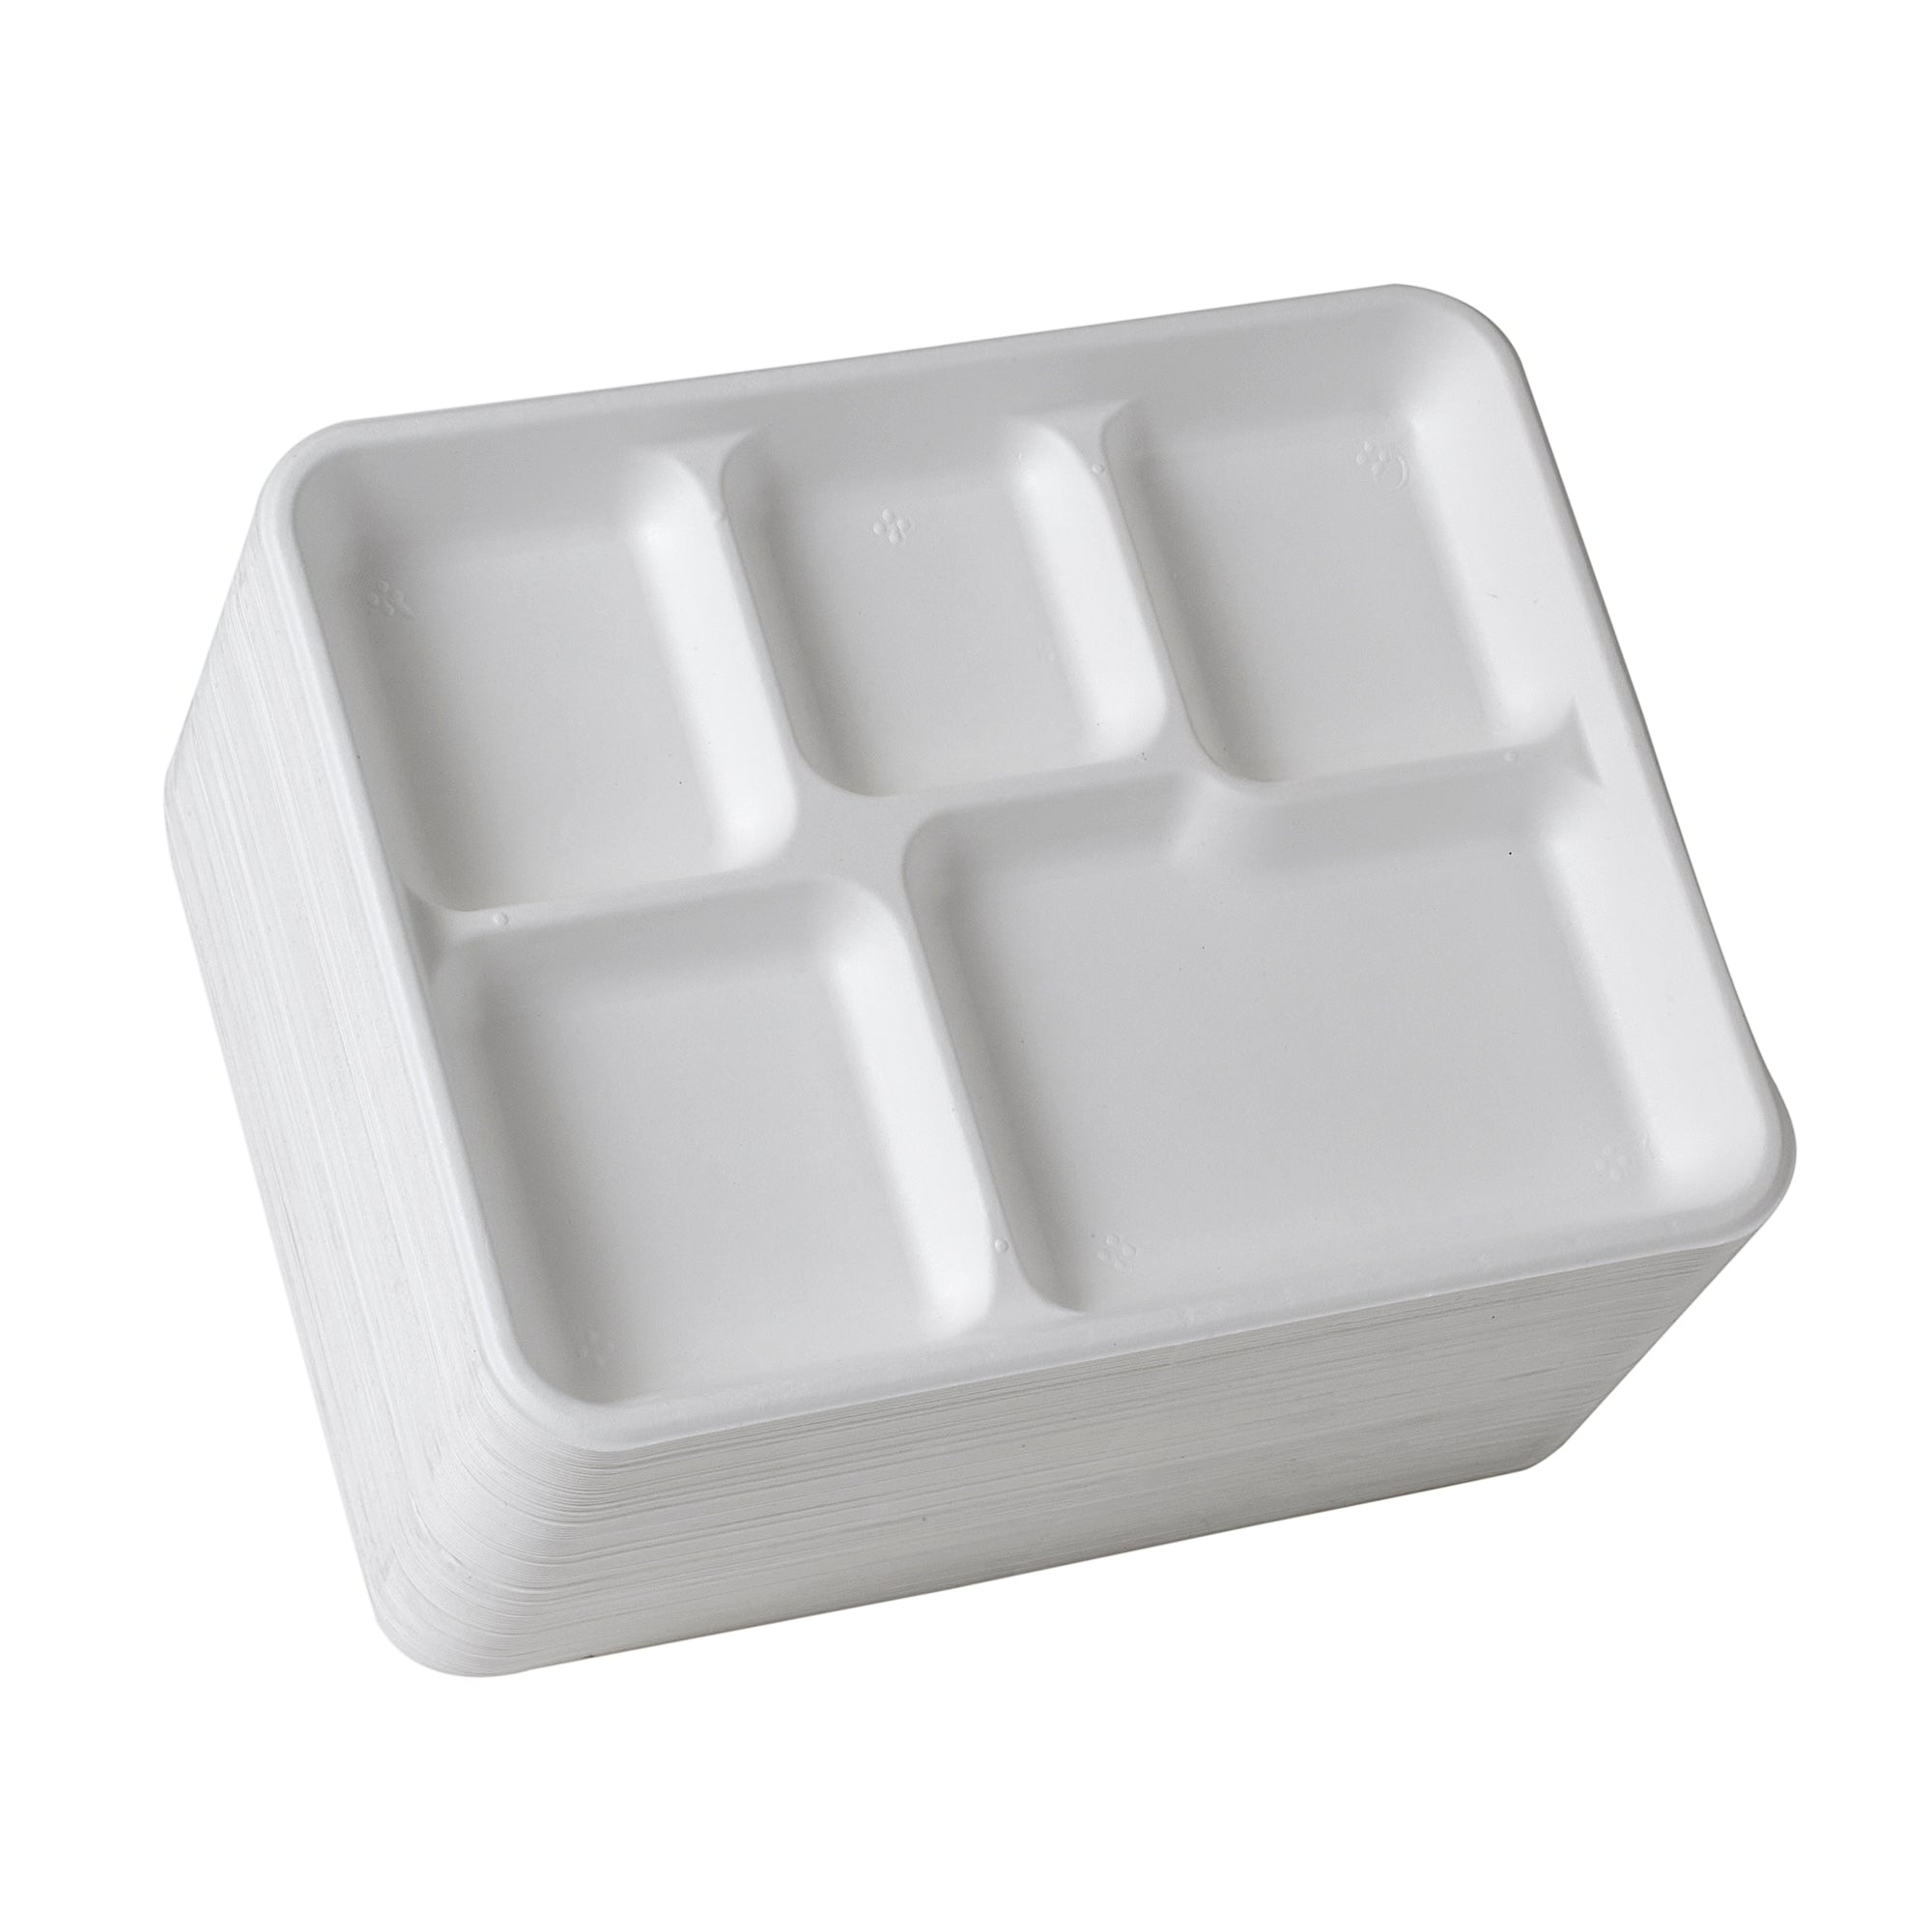 100-Pack] compostable plates 5-Compartment rectangle white